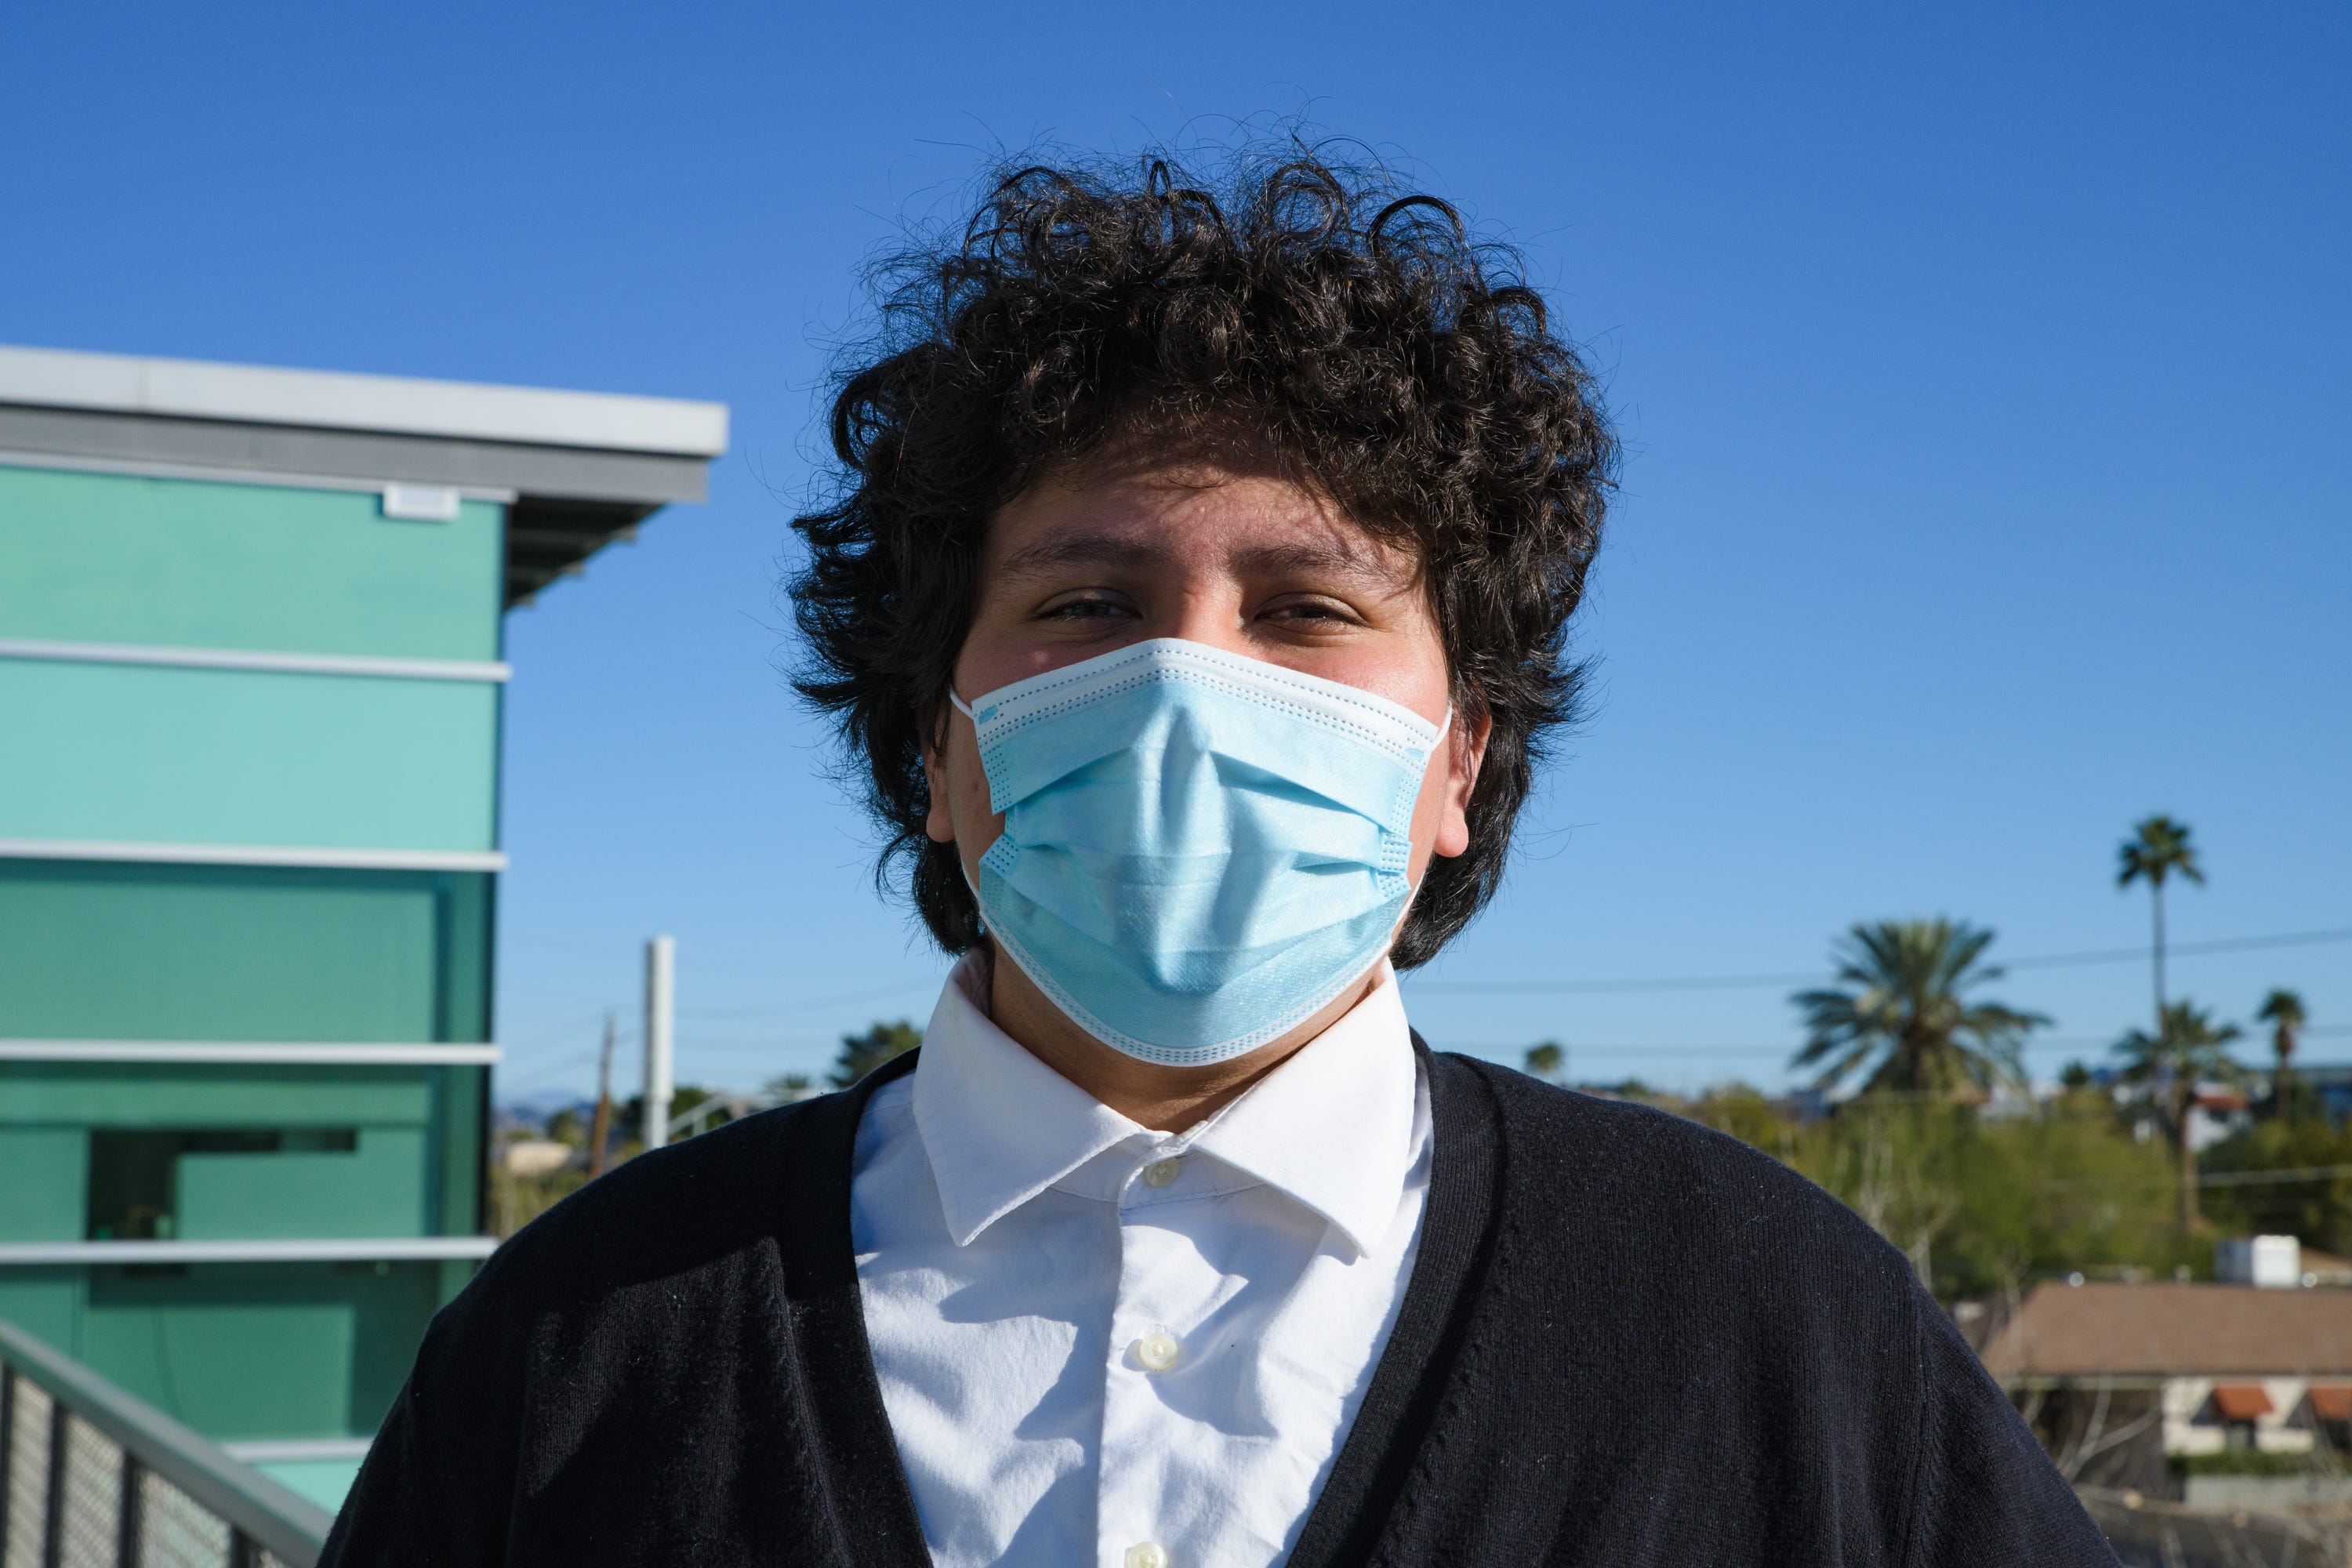 Cesar Soberanes, 19, had planned to attend Arizona State University. However, the pandemic and finances forced him to change his plans.